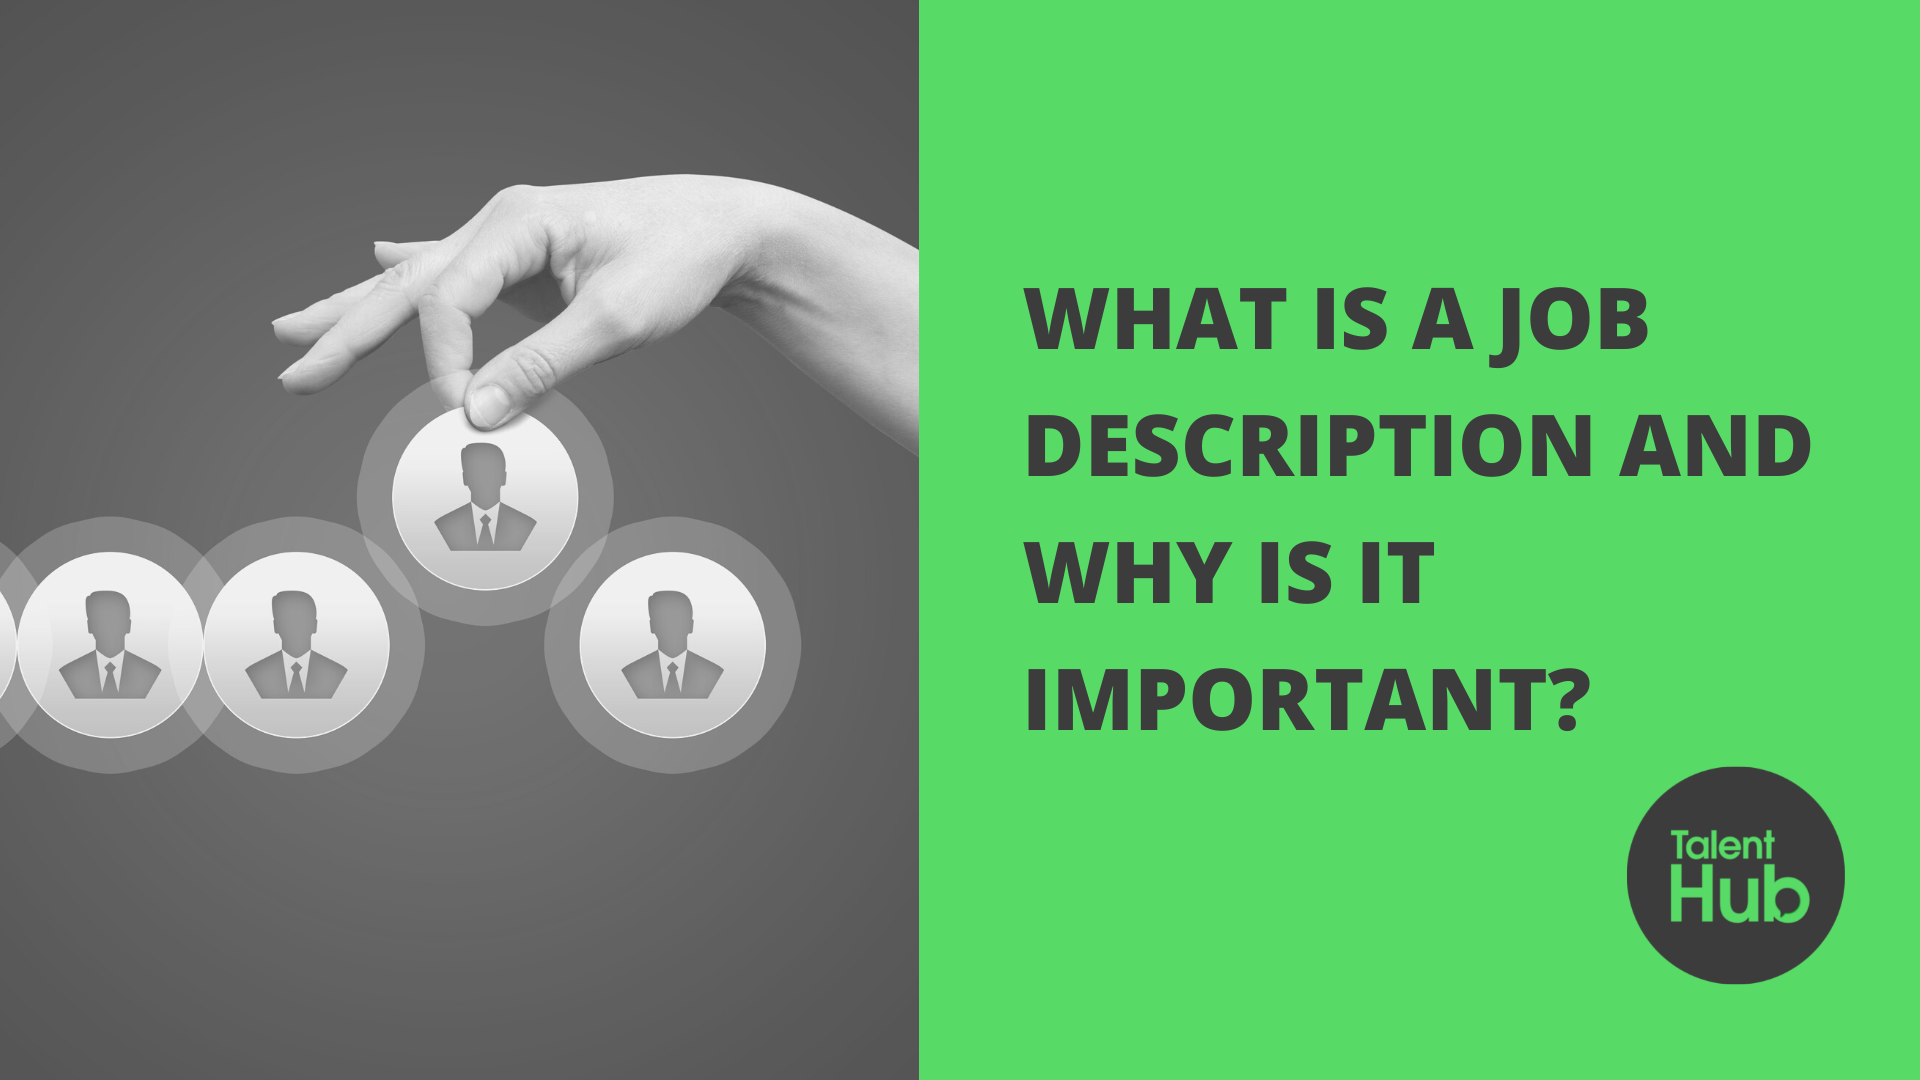 What Is a Job Description And Why Is It Important